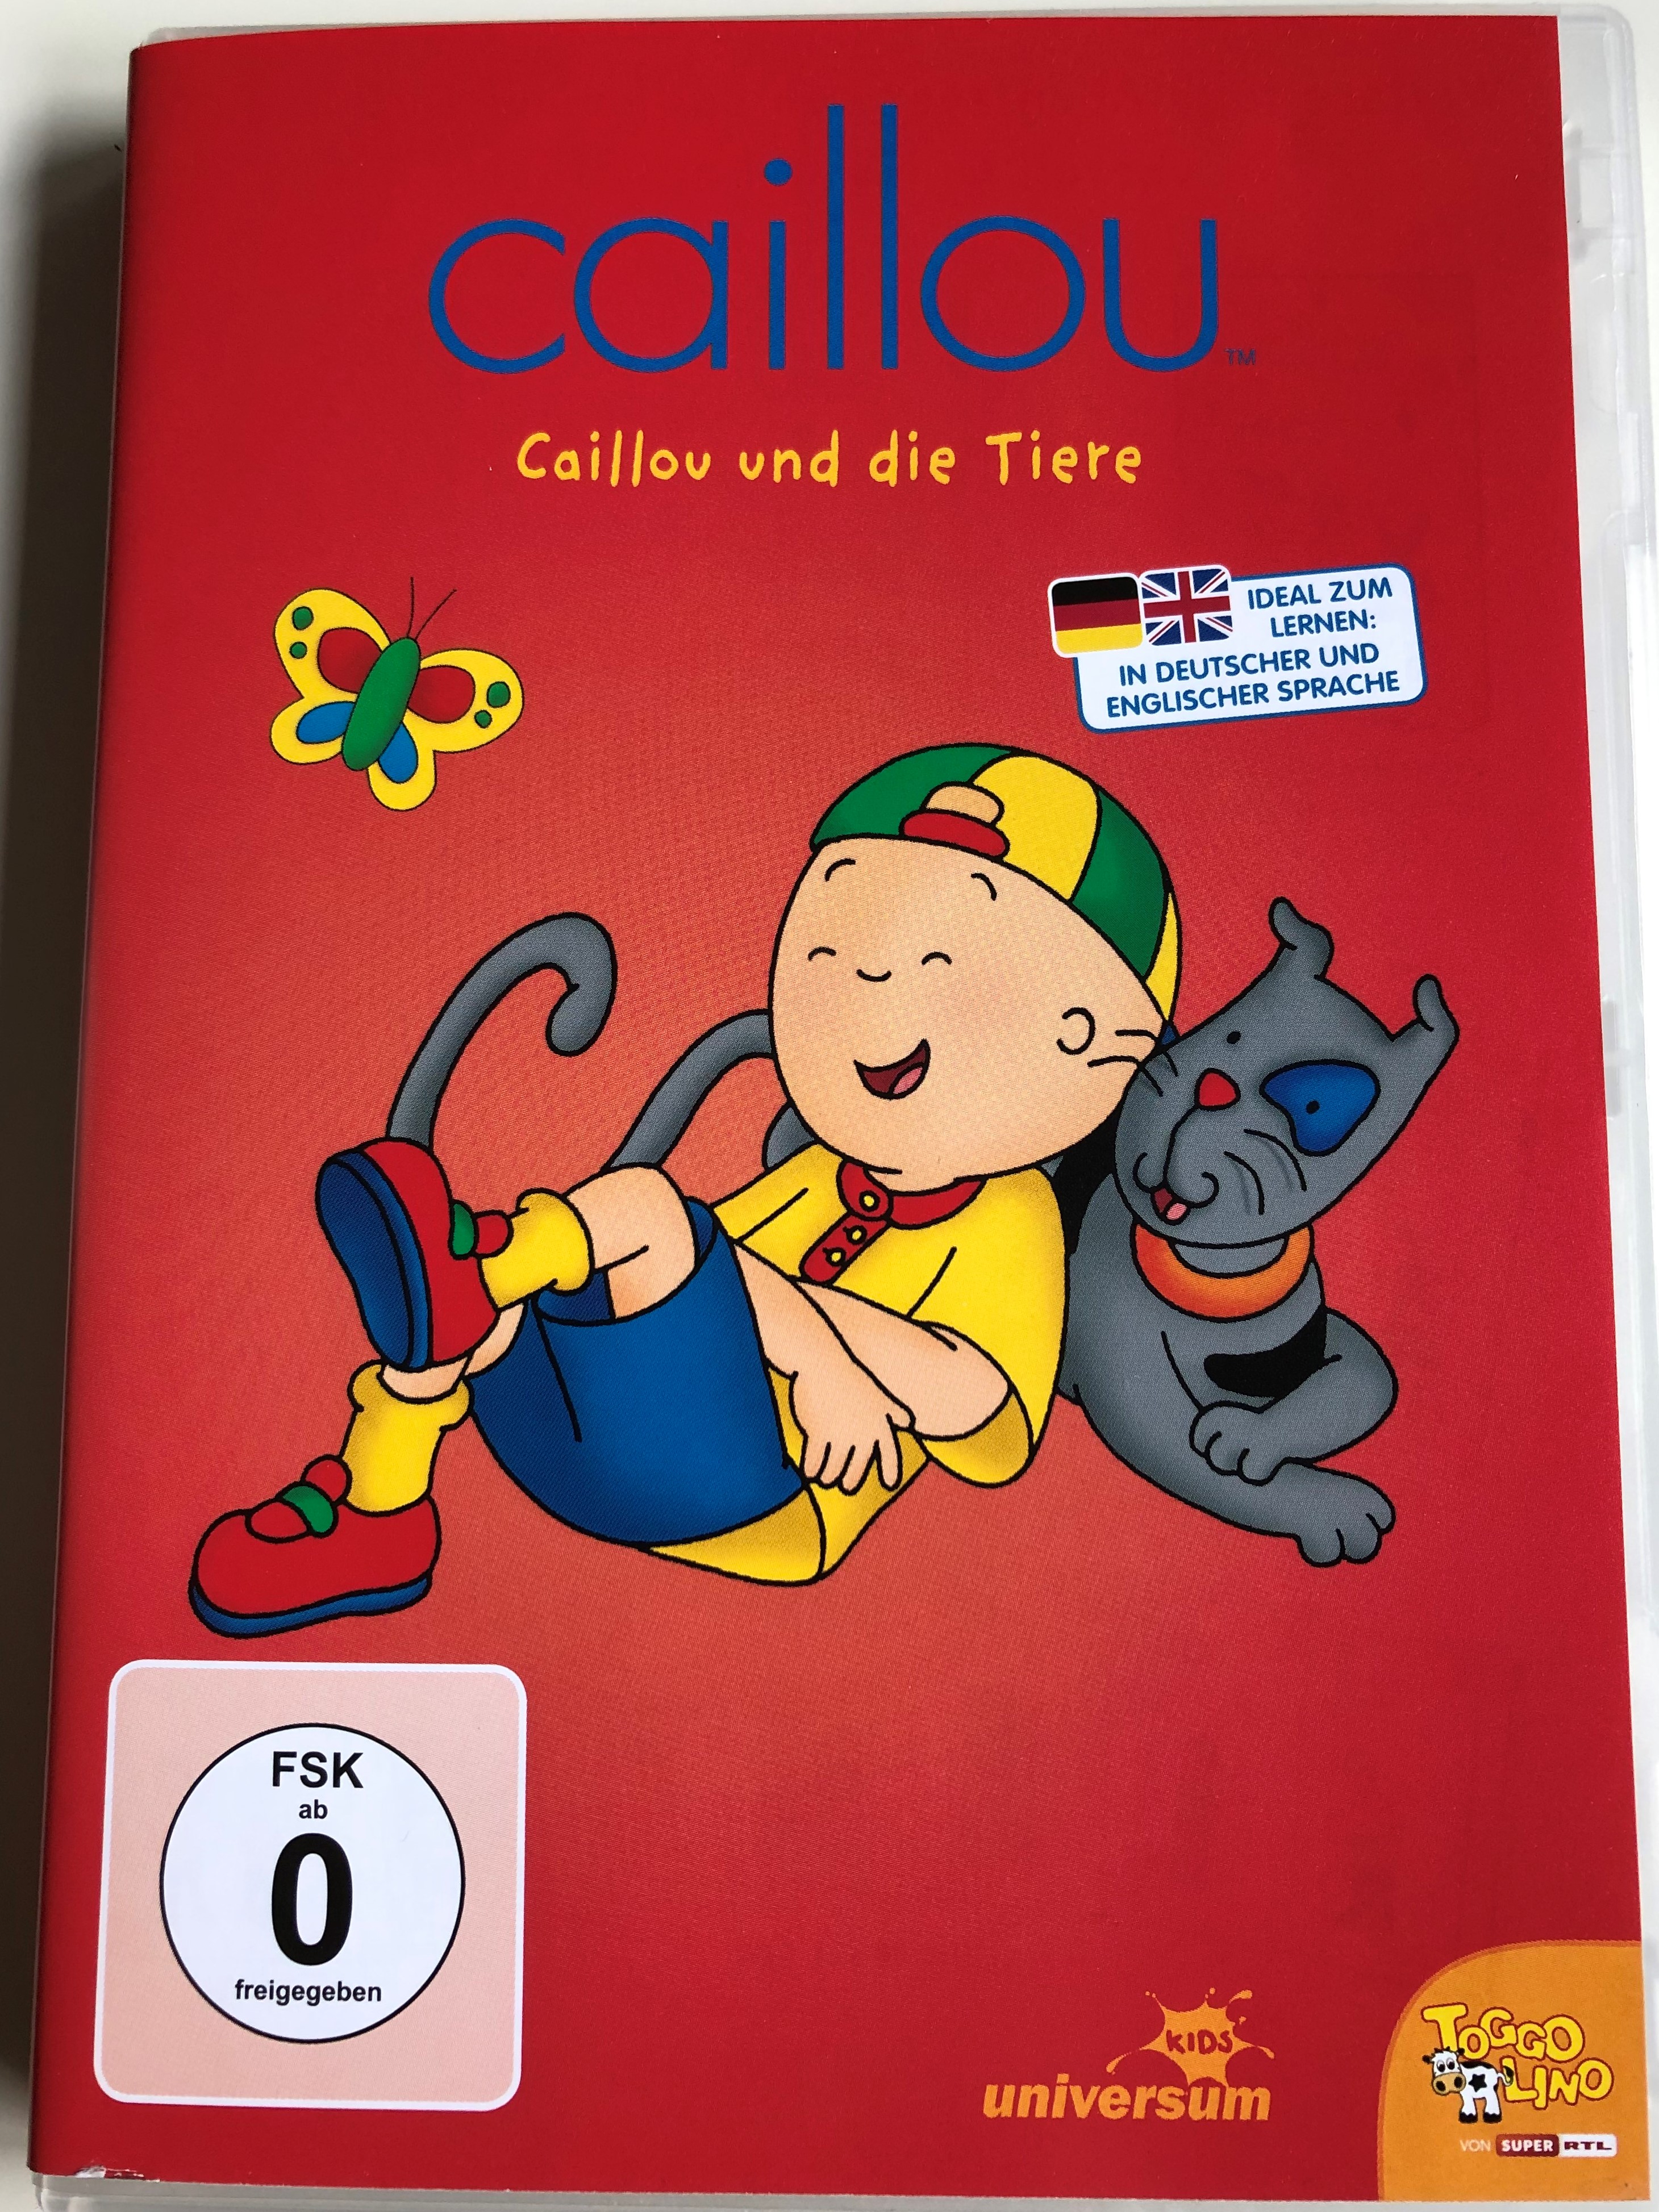 Caillou DVD 2000 Caillou und die Tiere / Directed by Jean Pilotte /  Canadian educational children's television series - Bible in My Language